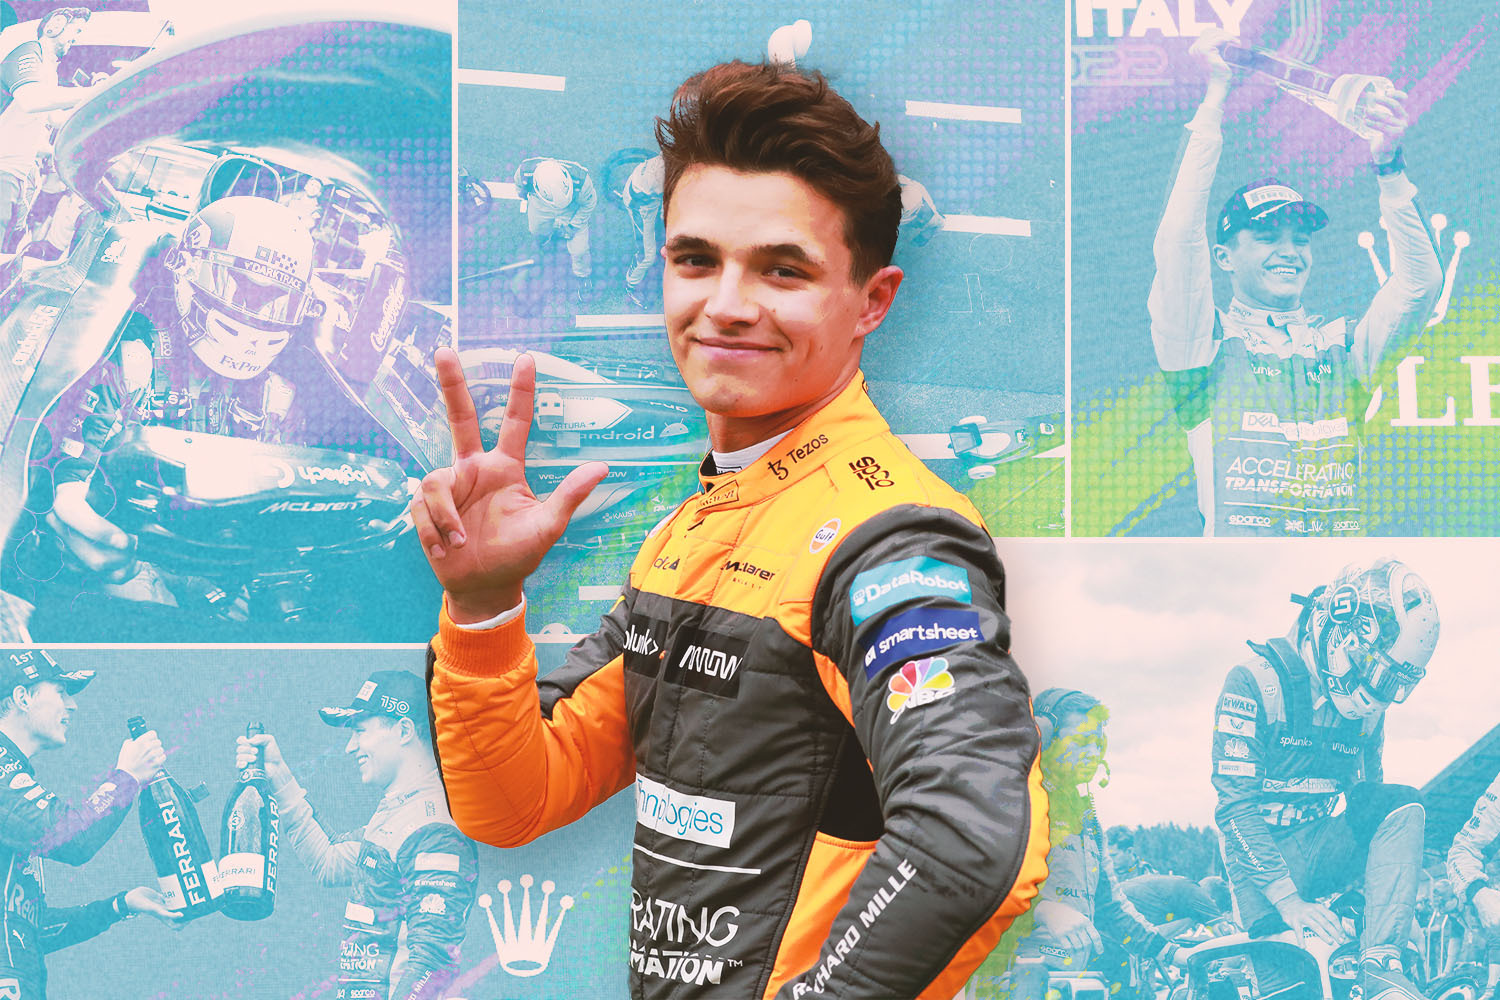 The 22-year-old British-Belgian Formula 1 driver Lando Norris waving in his racing suit in front of photos of the 2022 F1 season